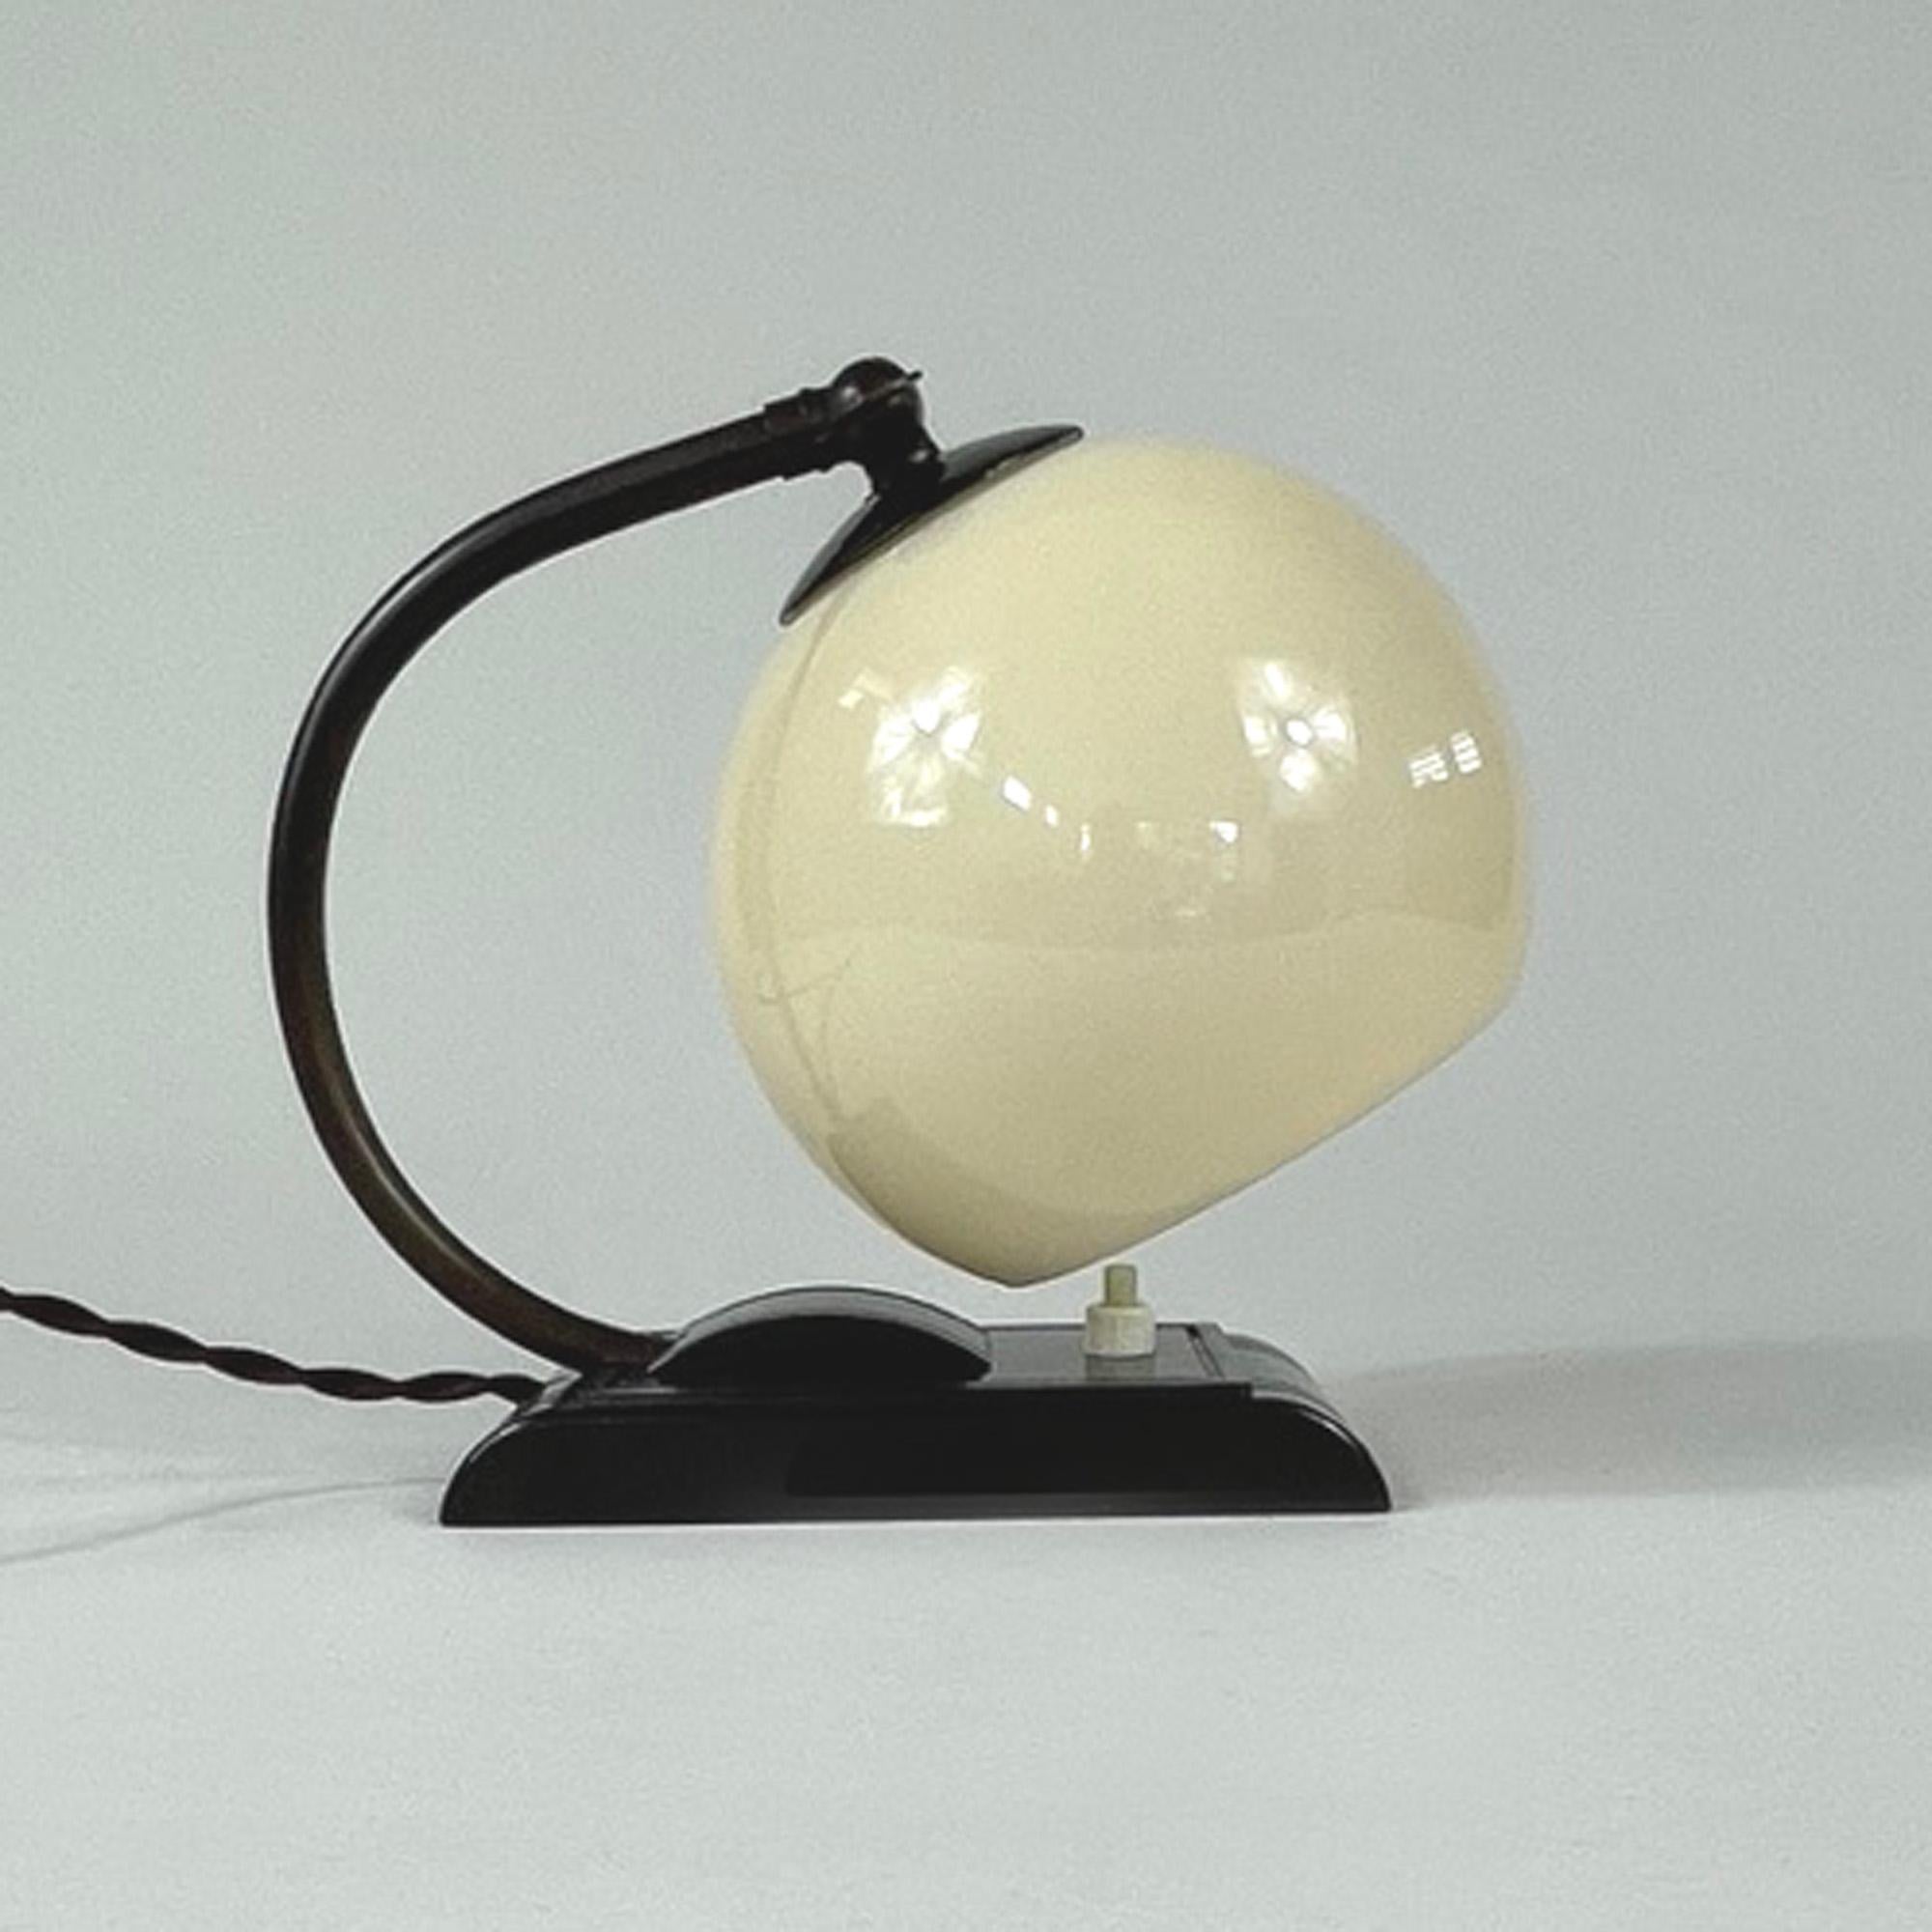 Art Deco Streamline Design Bakelite and Opaline Table Lamp, 1920s to 1930s For Sale 3